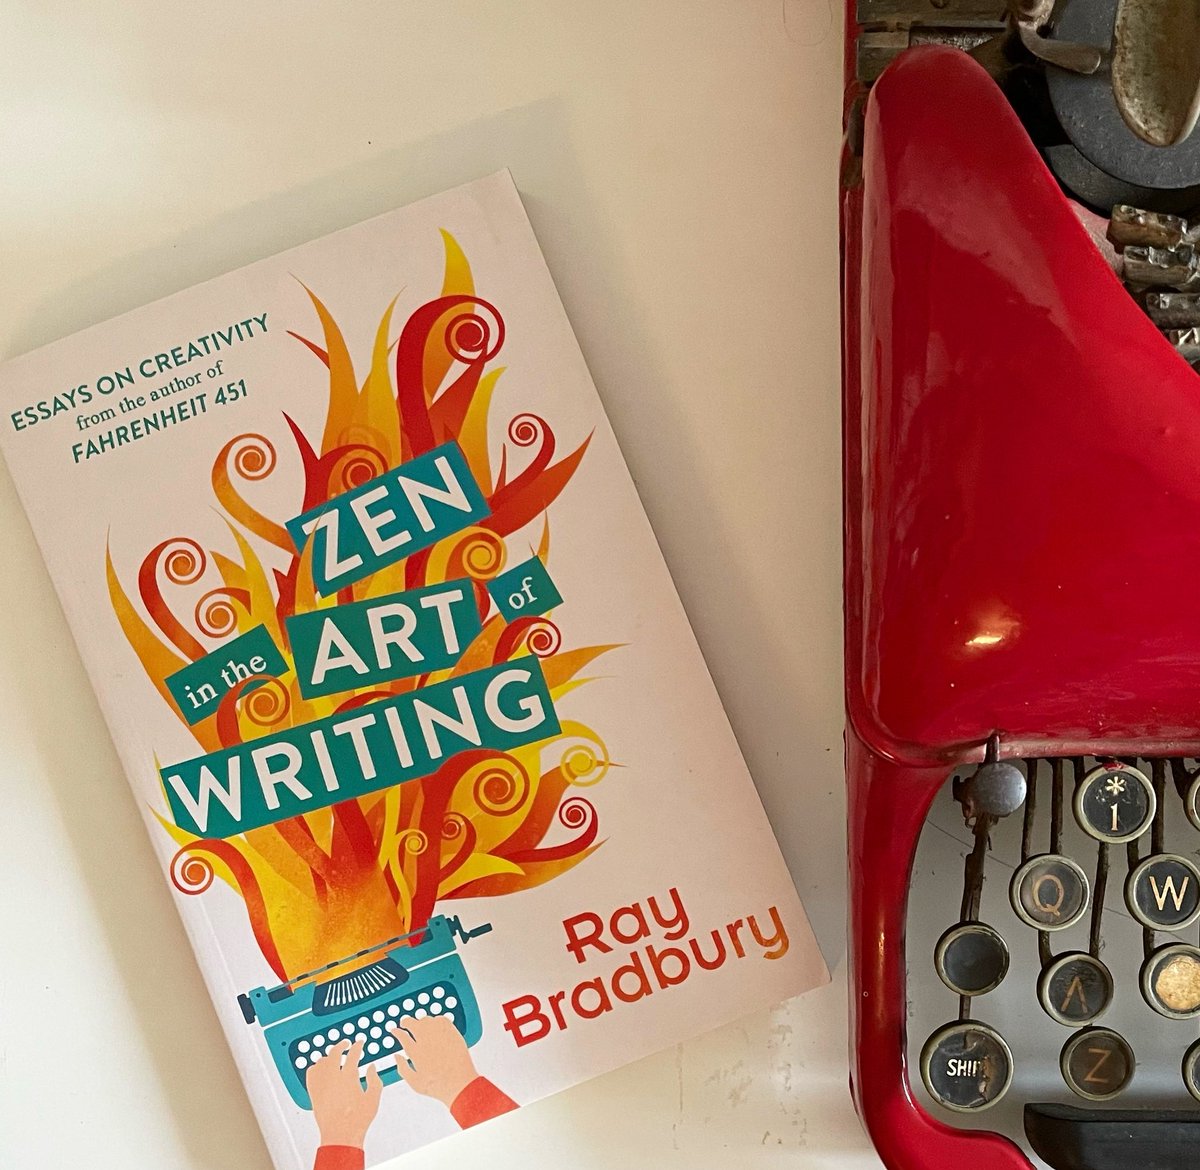 In this exuberant book, the incomparable Ray Bradbury shares the wisdom, experience, and excitement of a lifetime of writing. Here are practical tips on the art of writing from a master of the craft—everything from finding original ideas to developing your own voice and style.